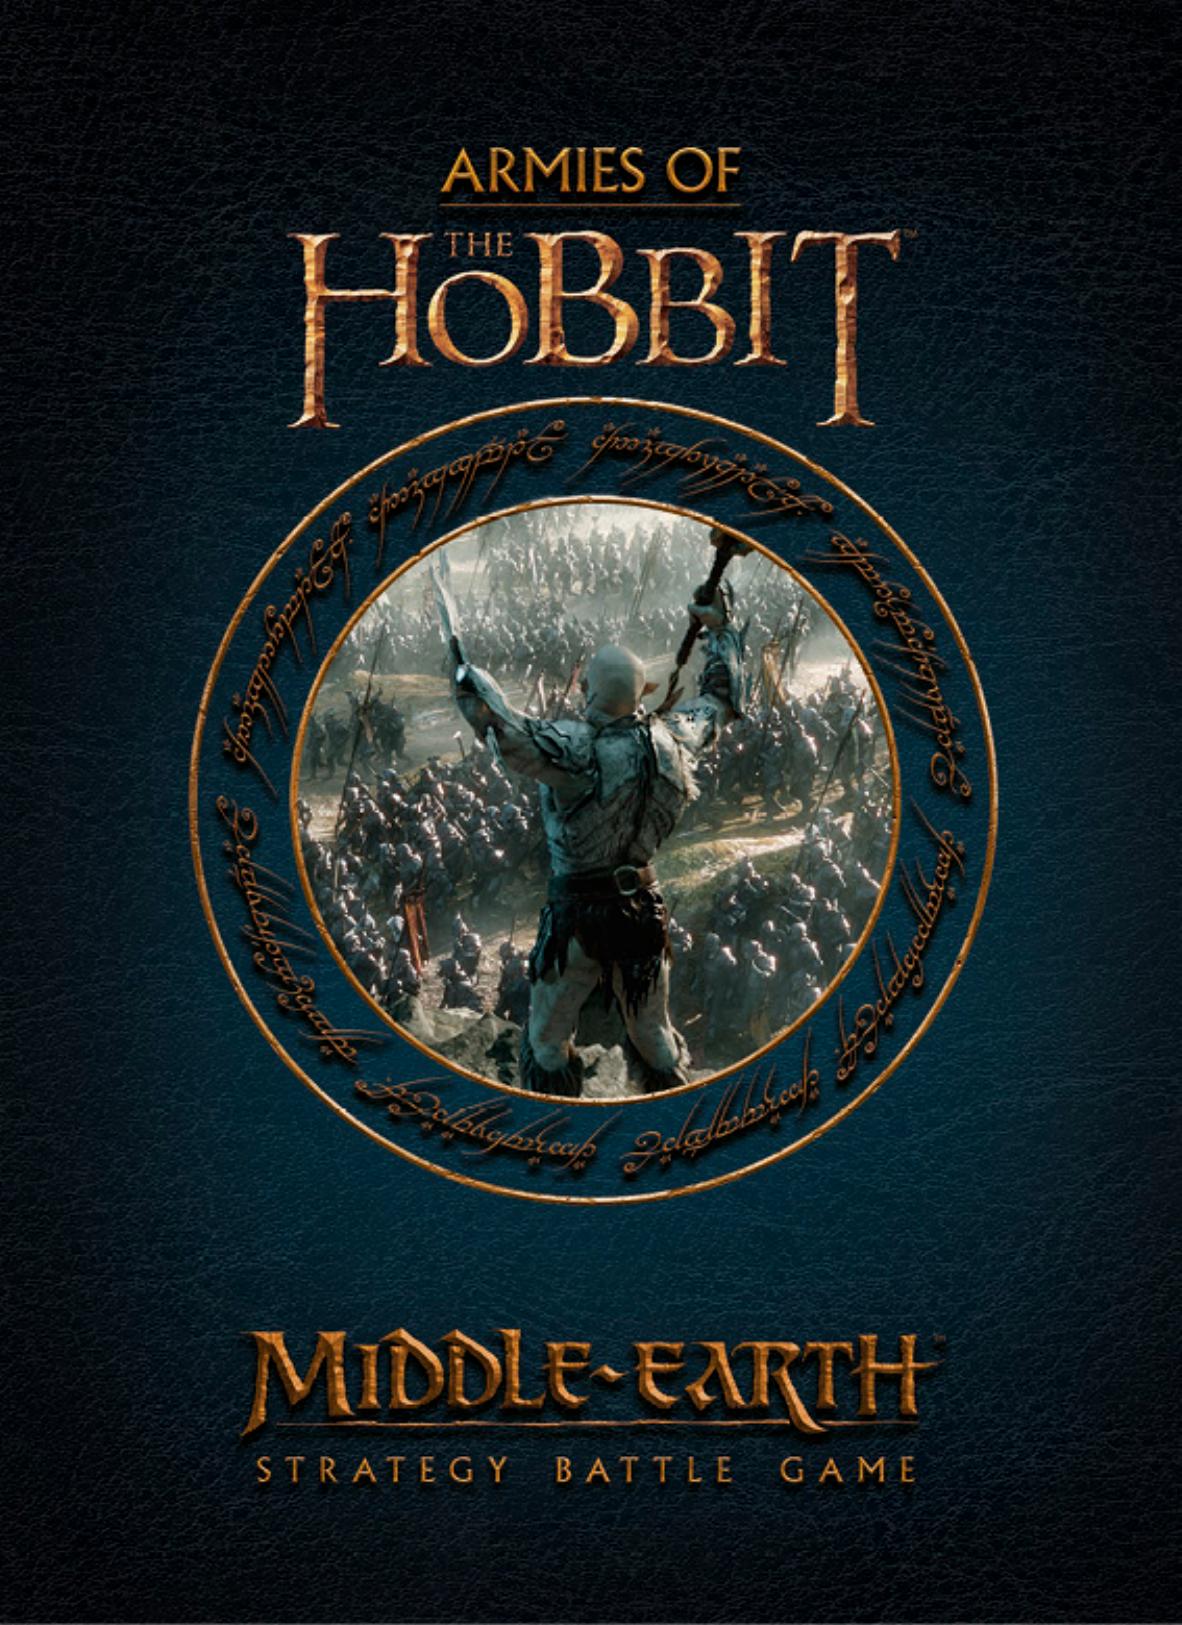 Middle-earth - The Armies of The Hobbit